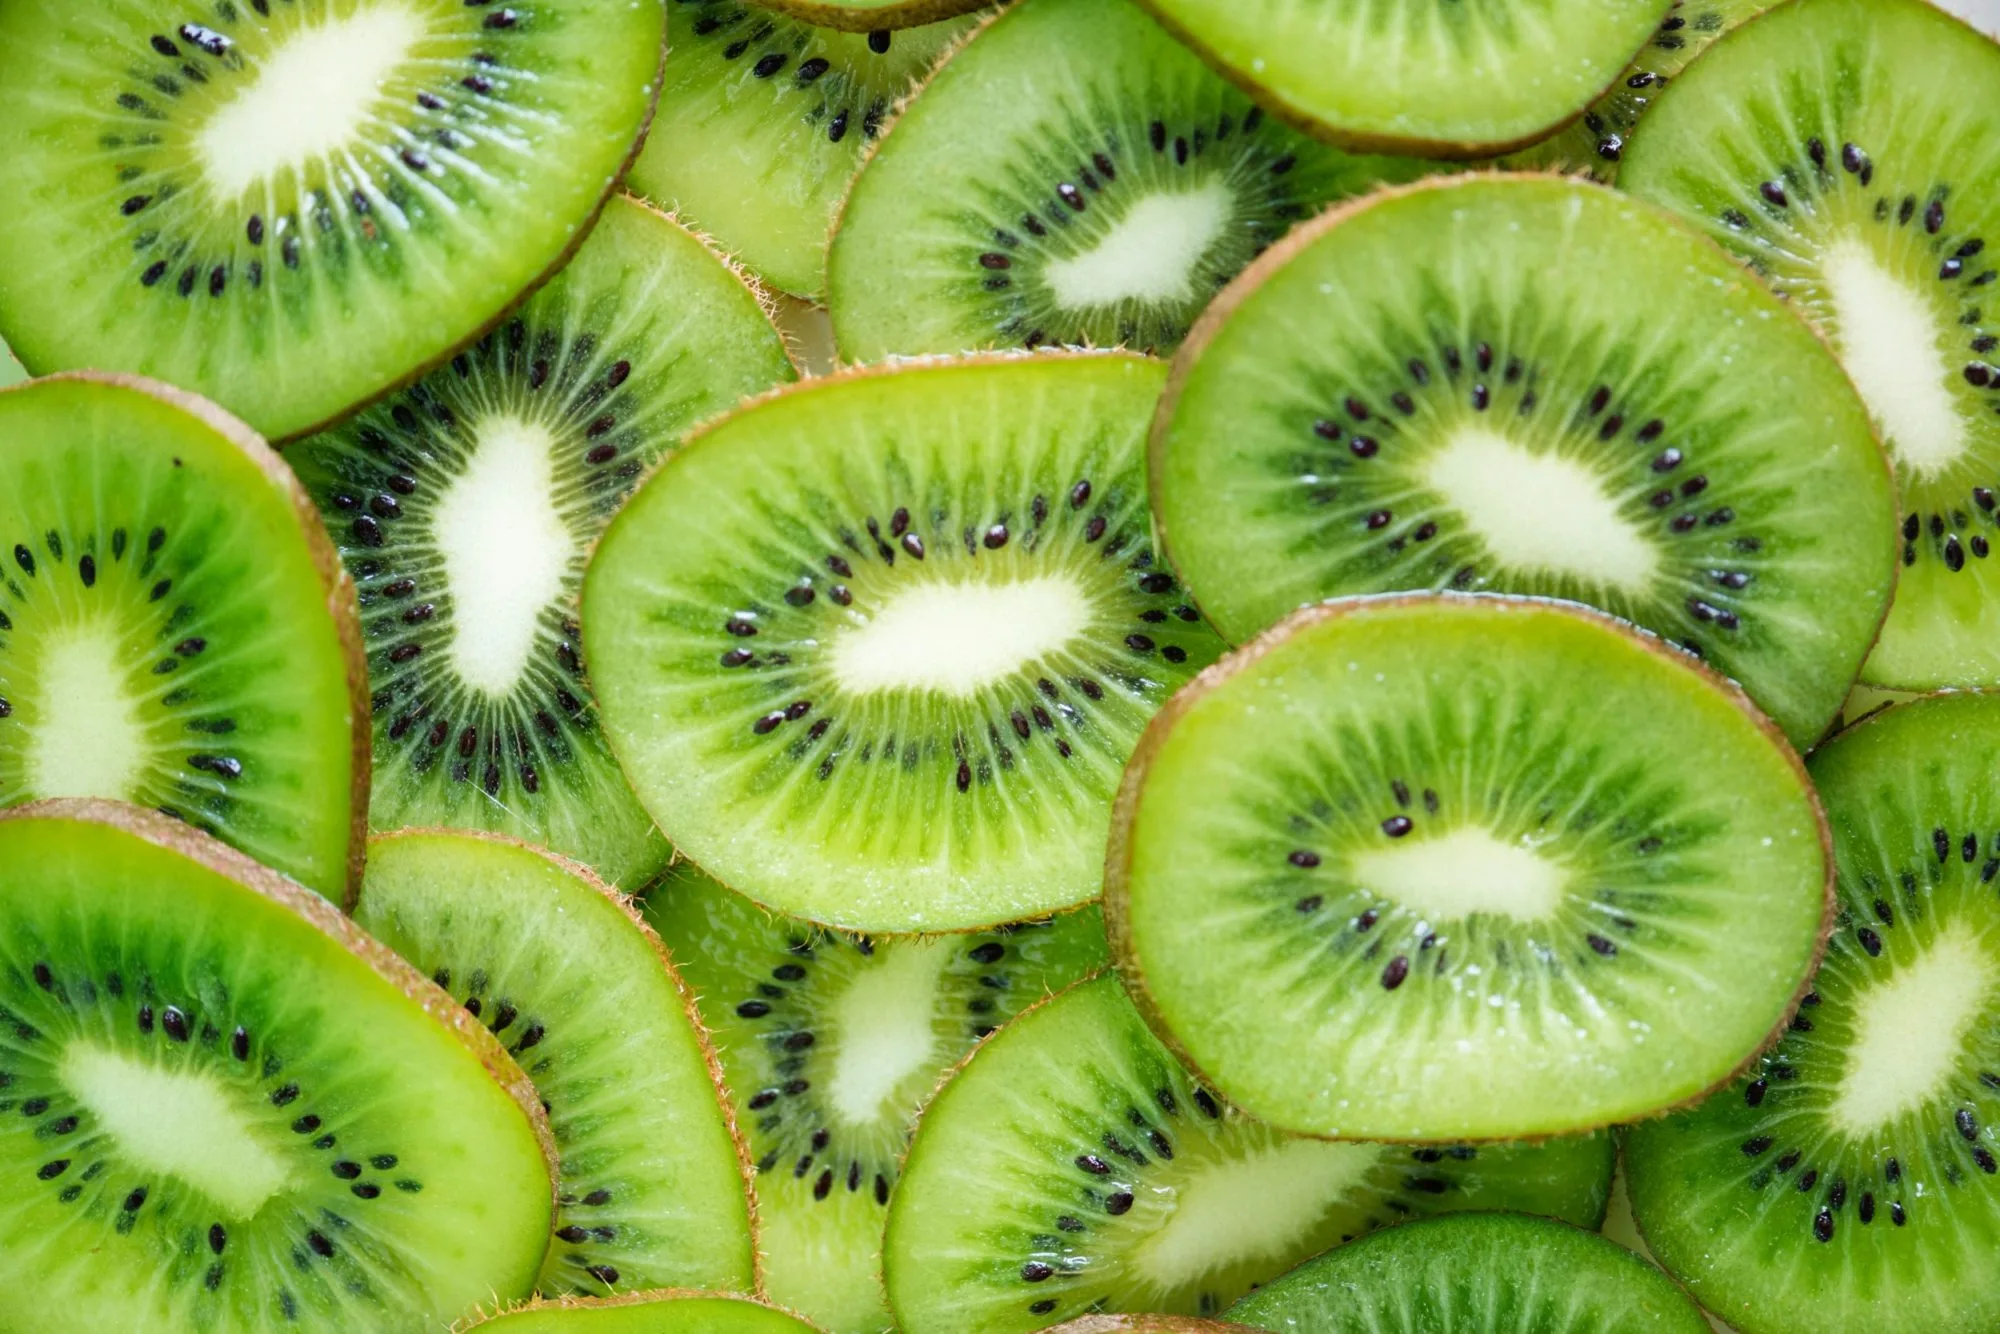 Why Kiwis Should Be On Your Grocery List